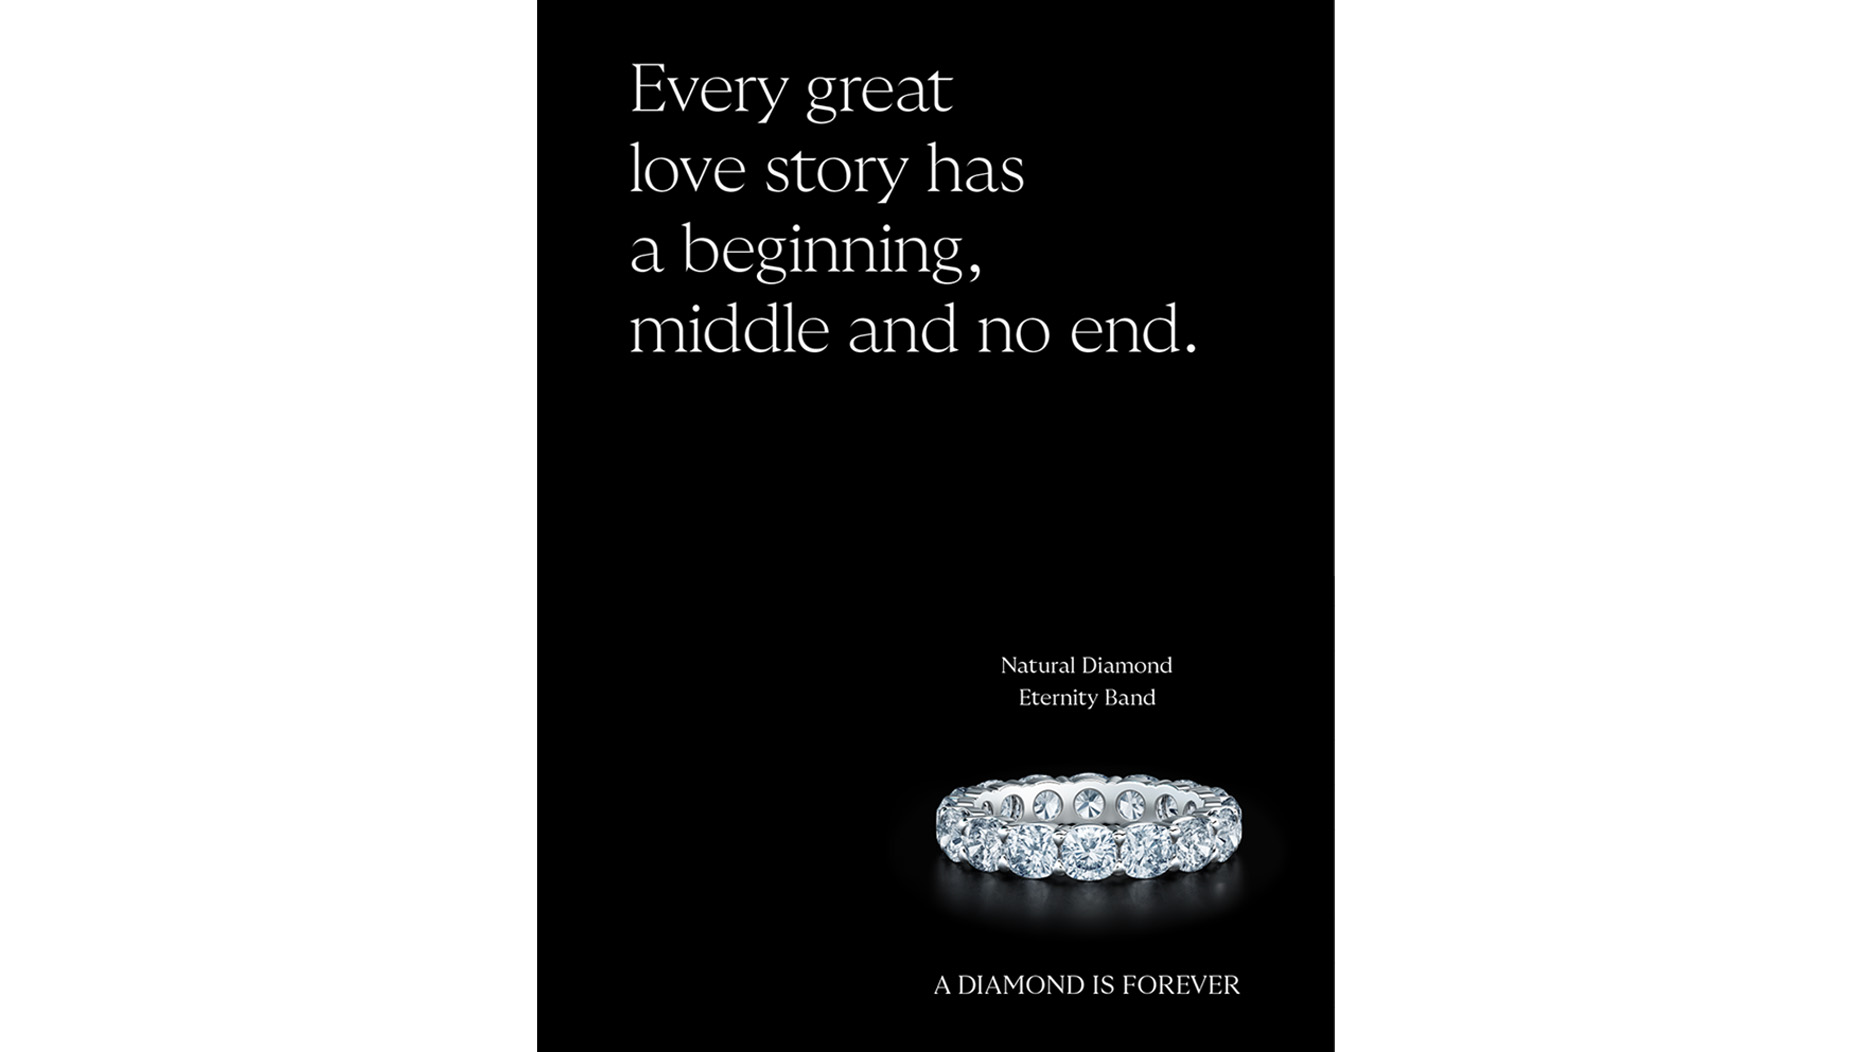 A De Beers Tagline is Forever